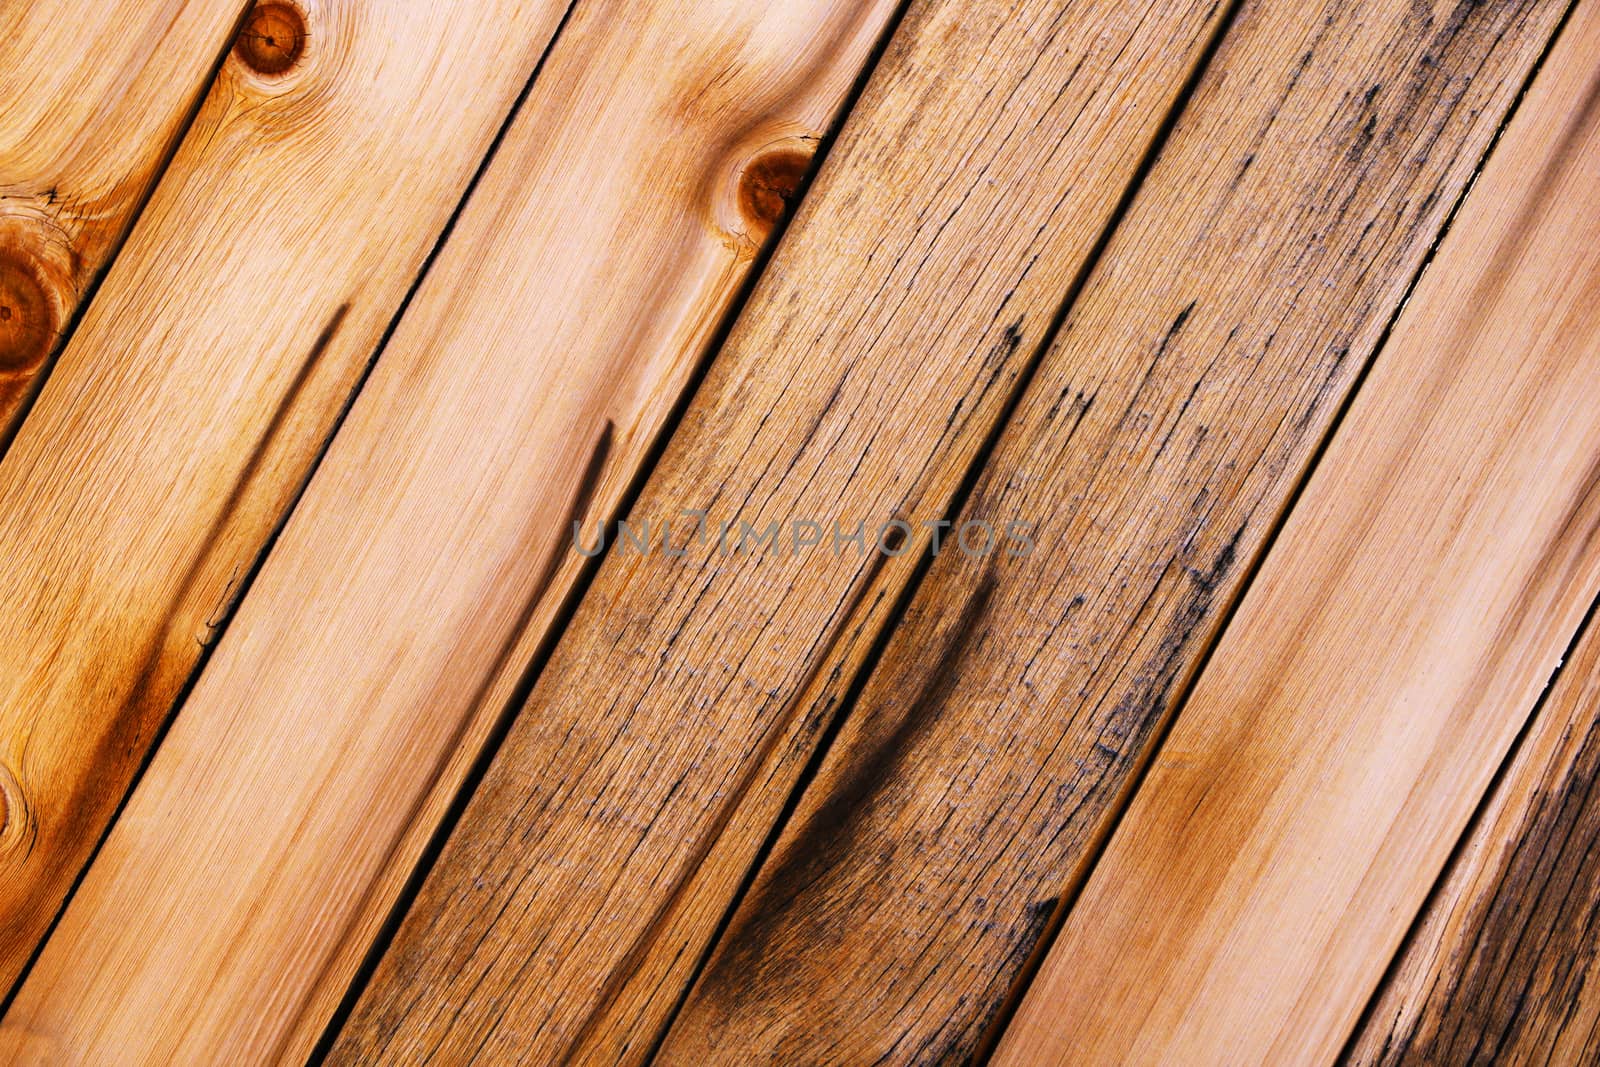 Old natural wooden texture used as background.